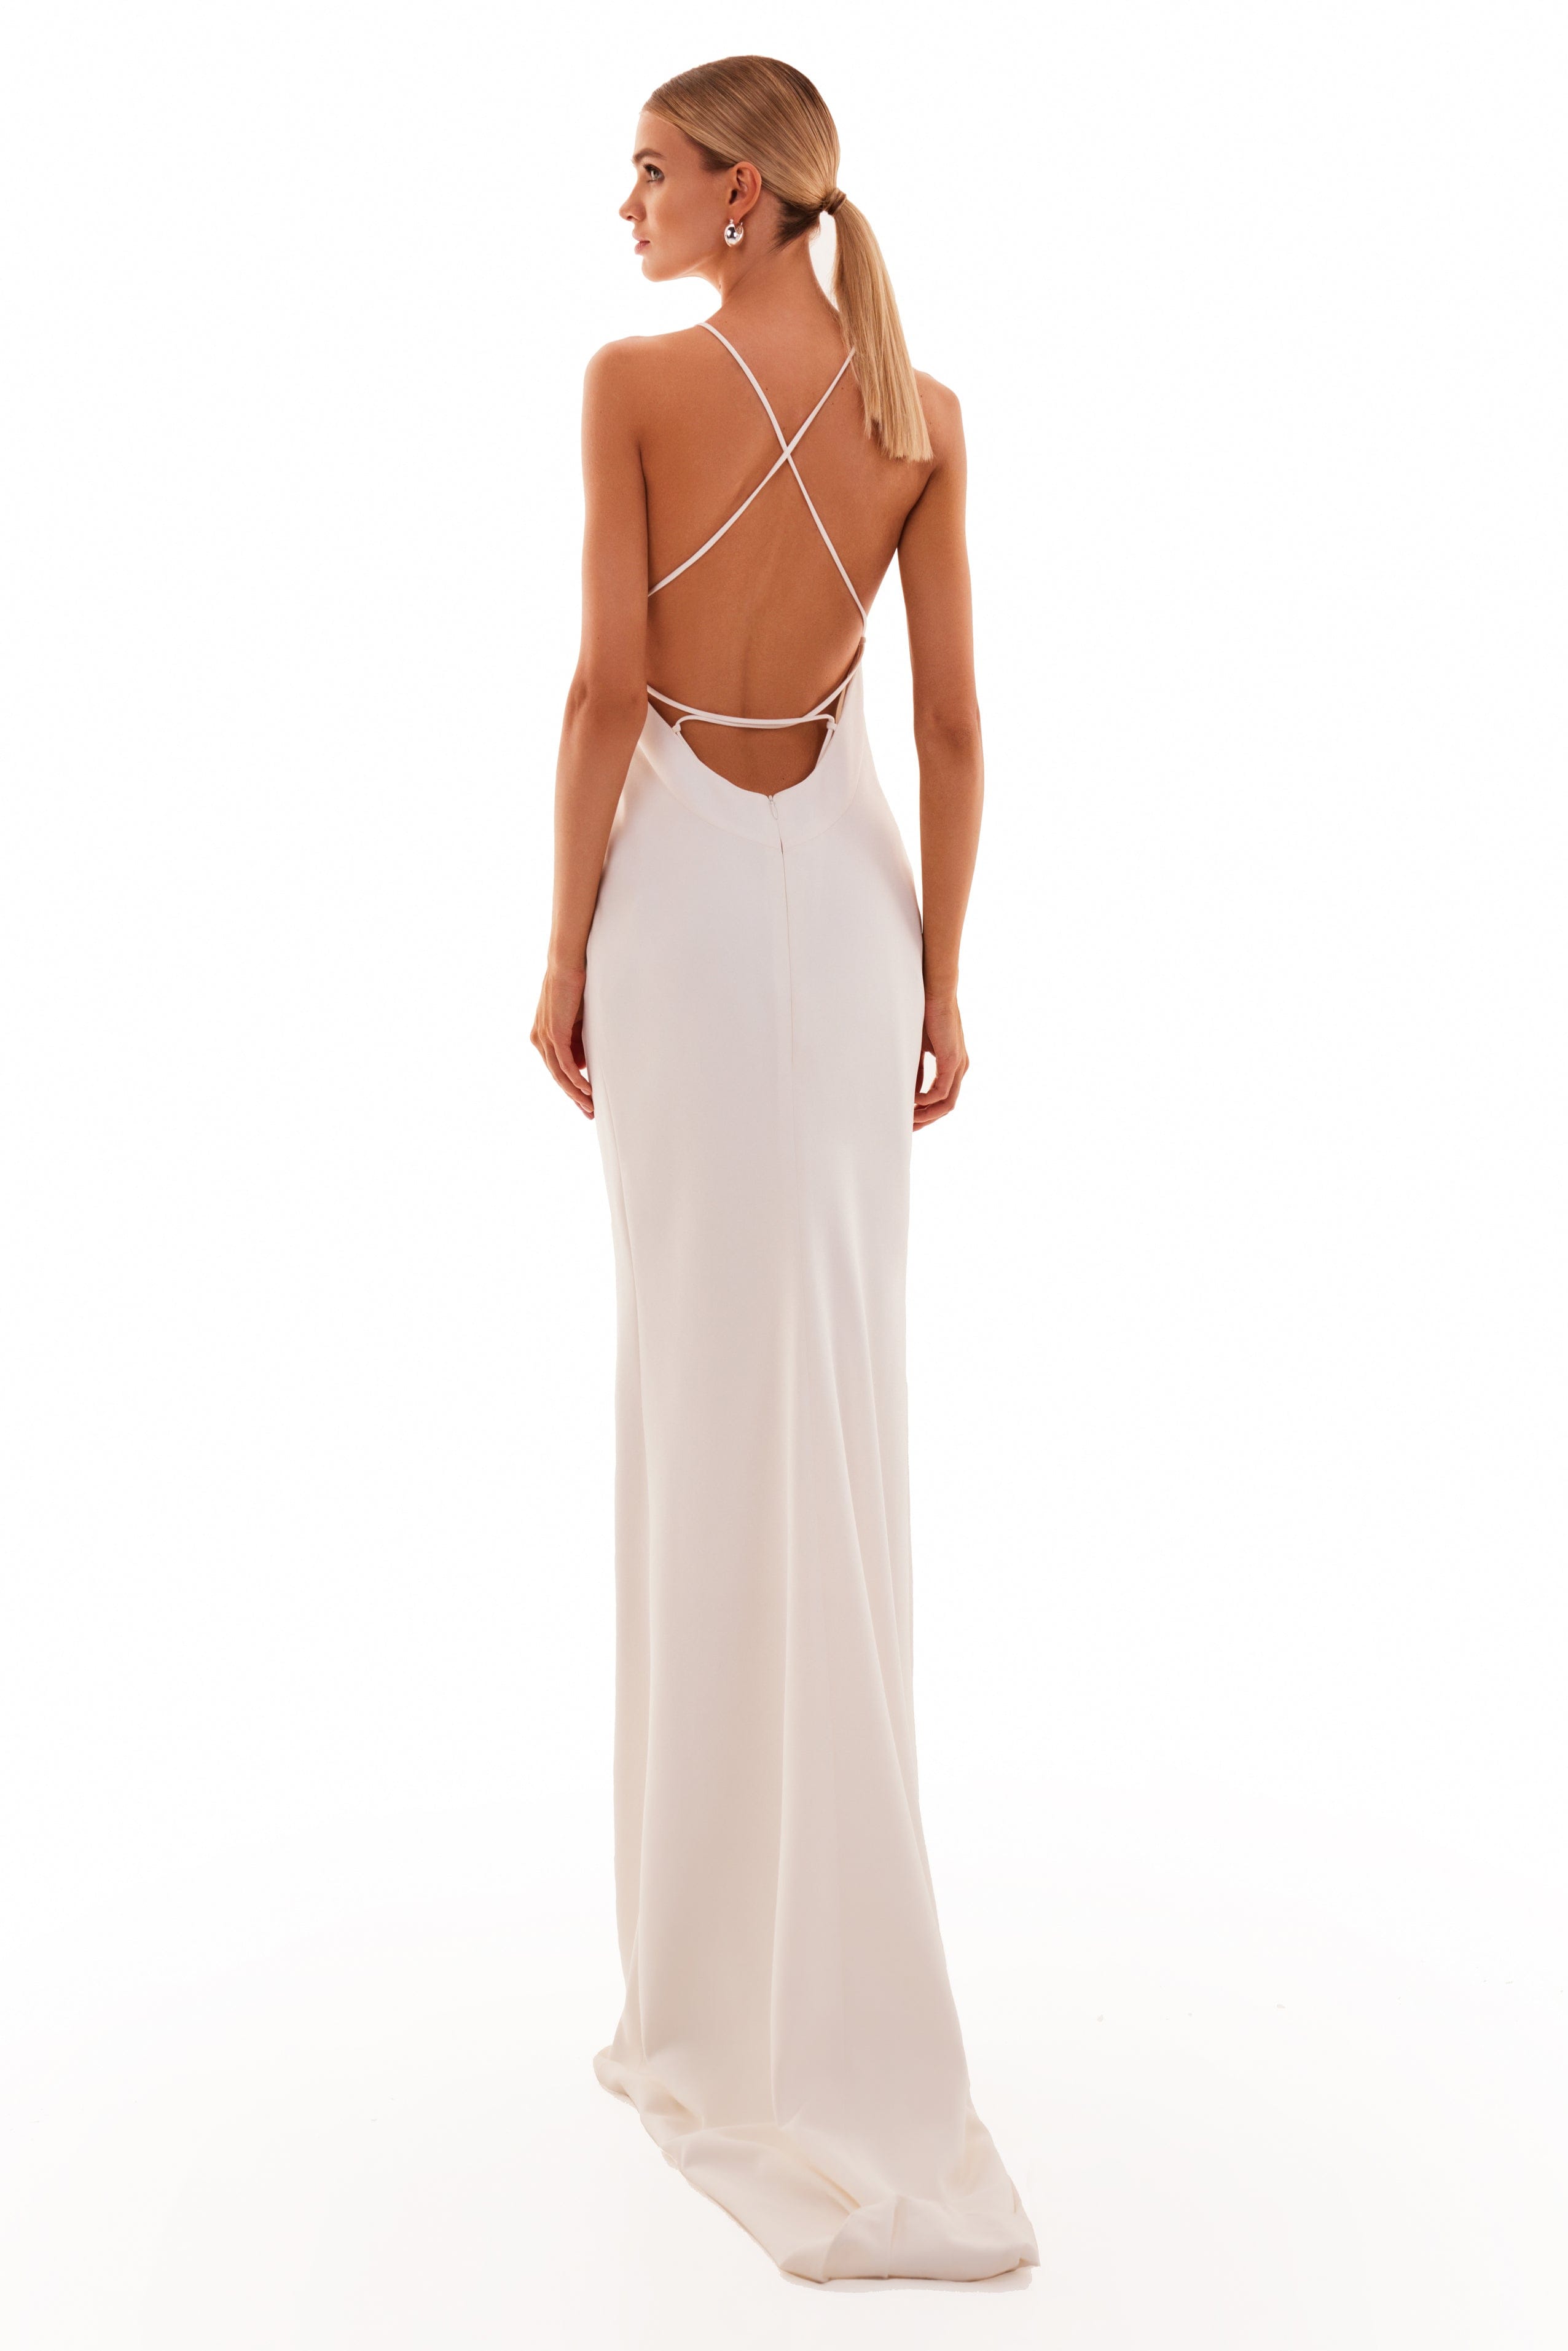 White halter top flowy maxi dress with gold necklace